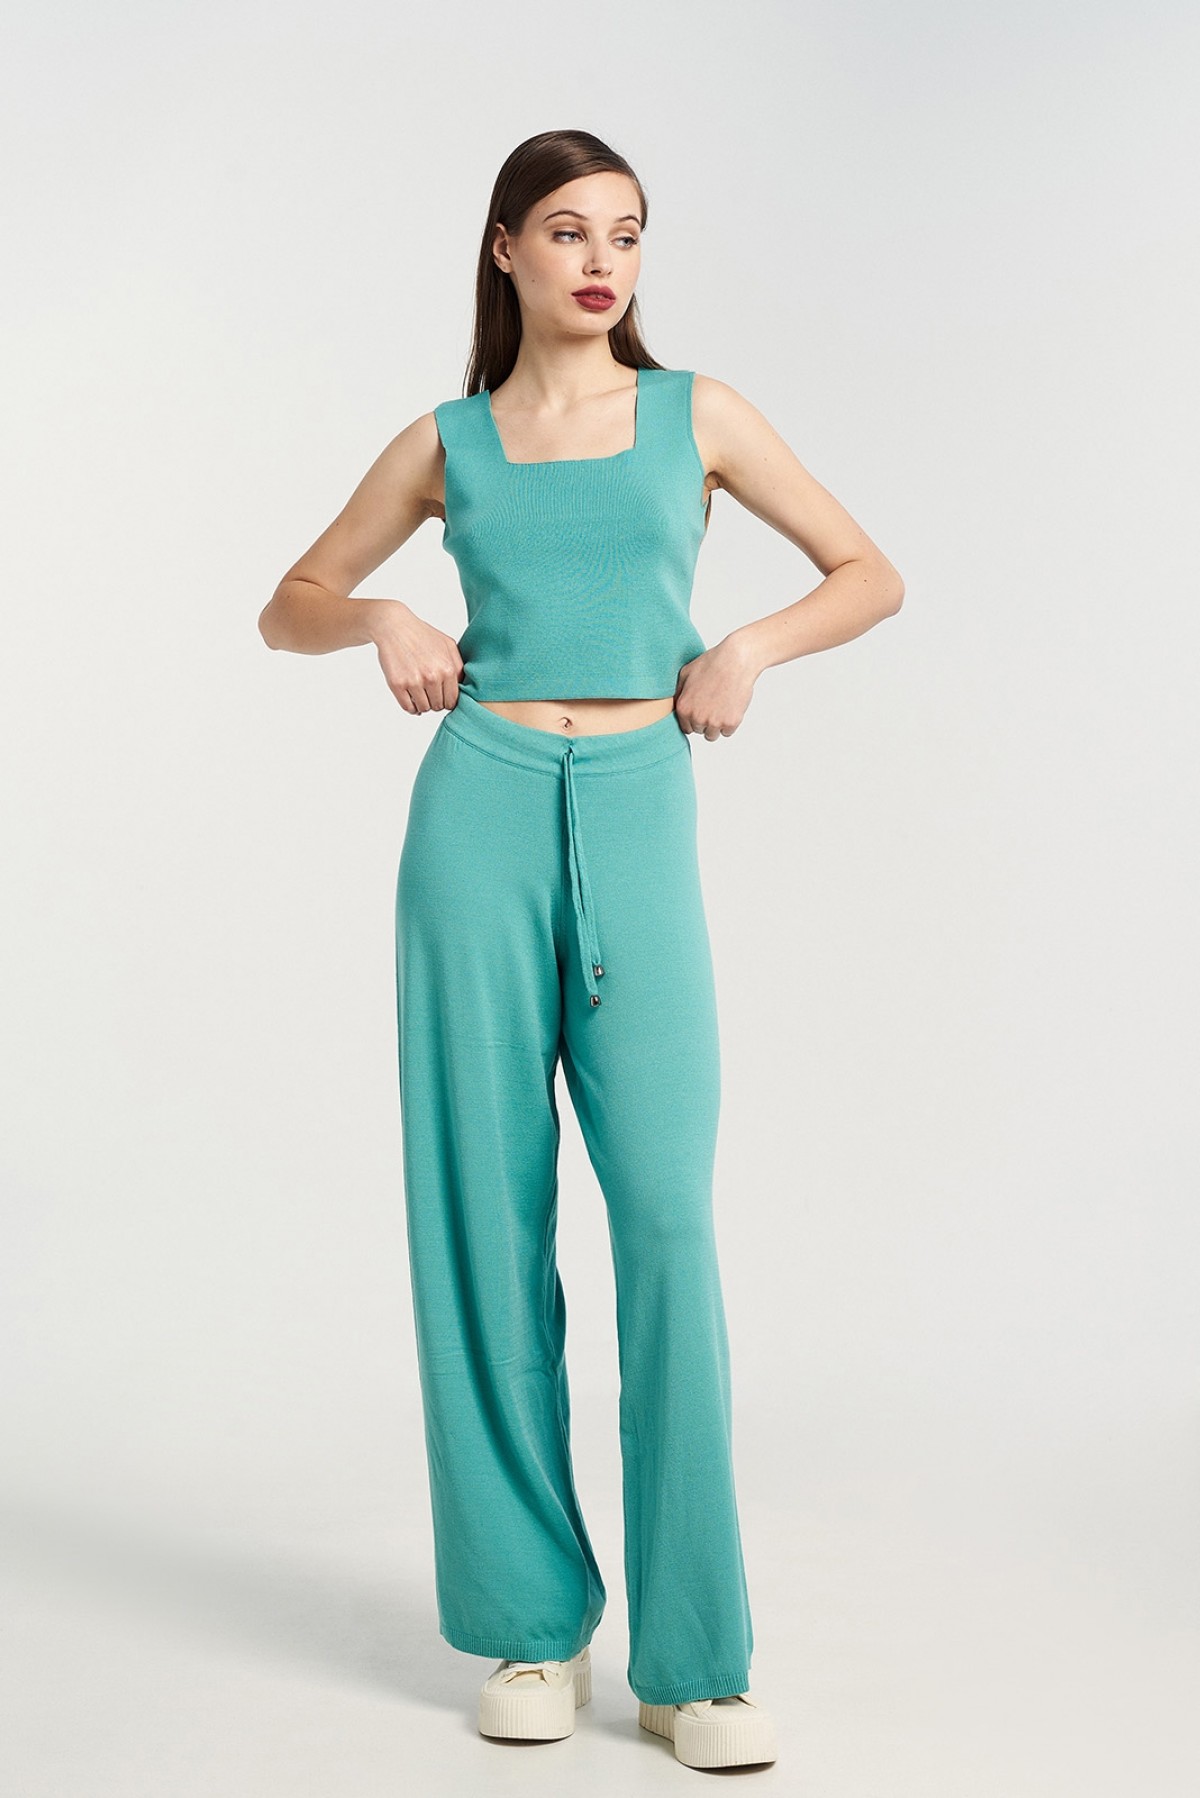 VISCOSE KNIT TROUSERS IN MINT